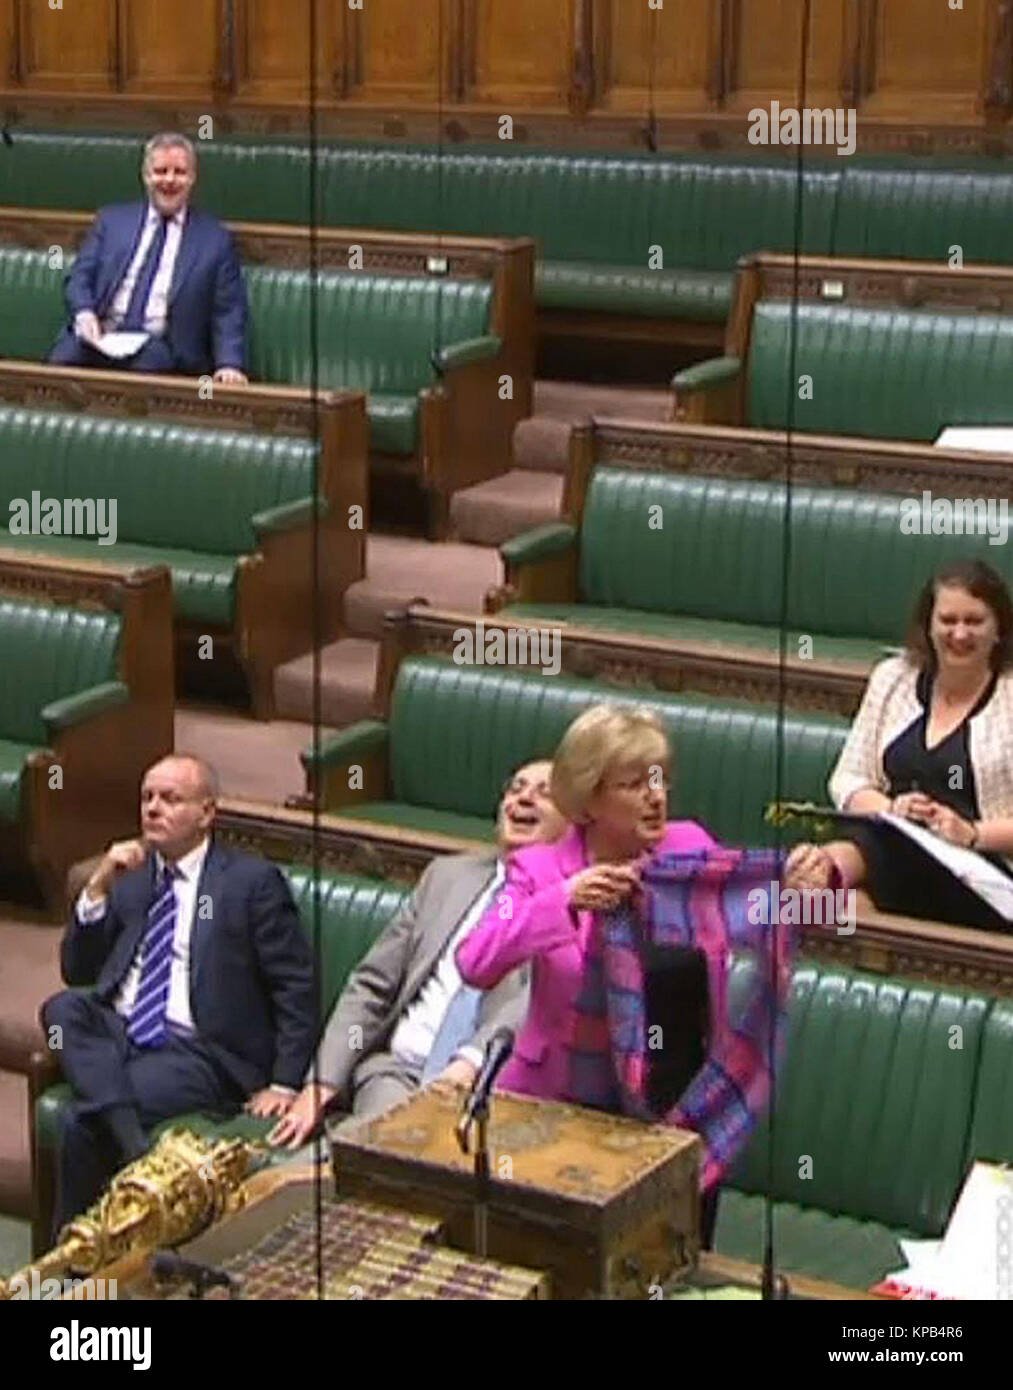 Commons Leader Andrea Leadsom dons a pink tartan scarf at the despatch box in the House of Commons, London, to mark a campaign by Cancer Research UK. Stock Photo